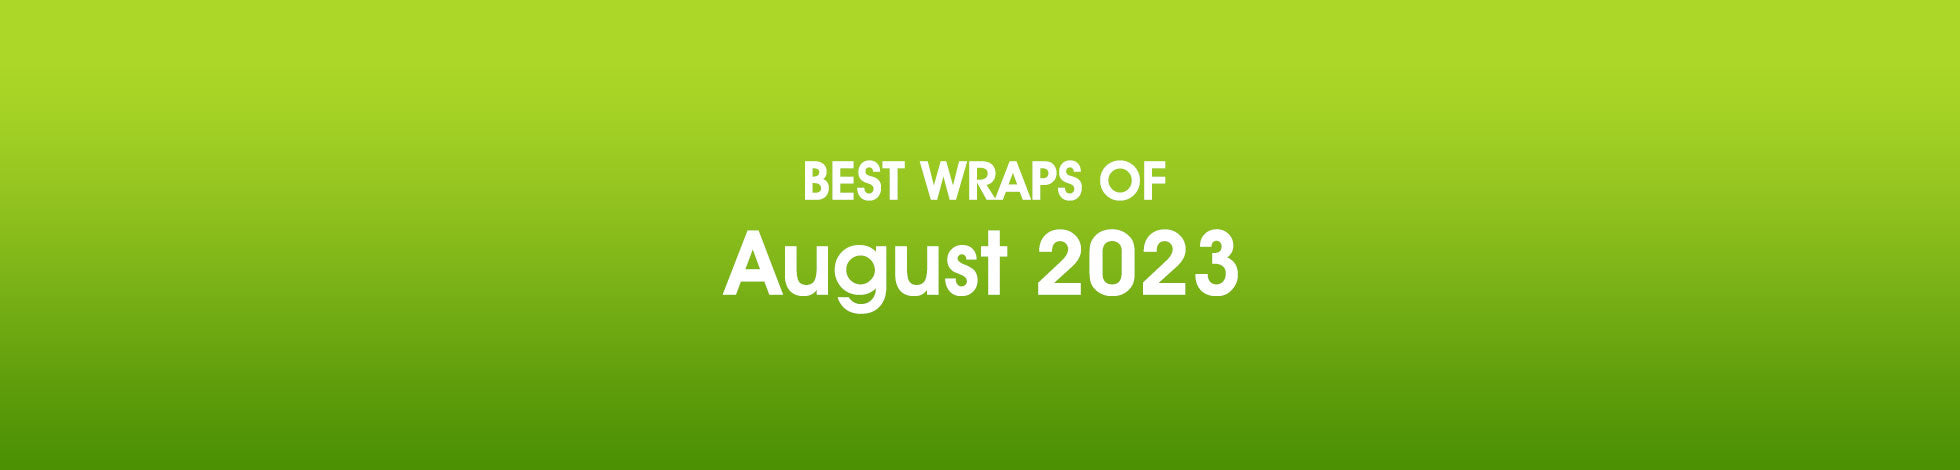 Top Cars of August 2023